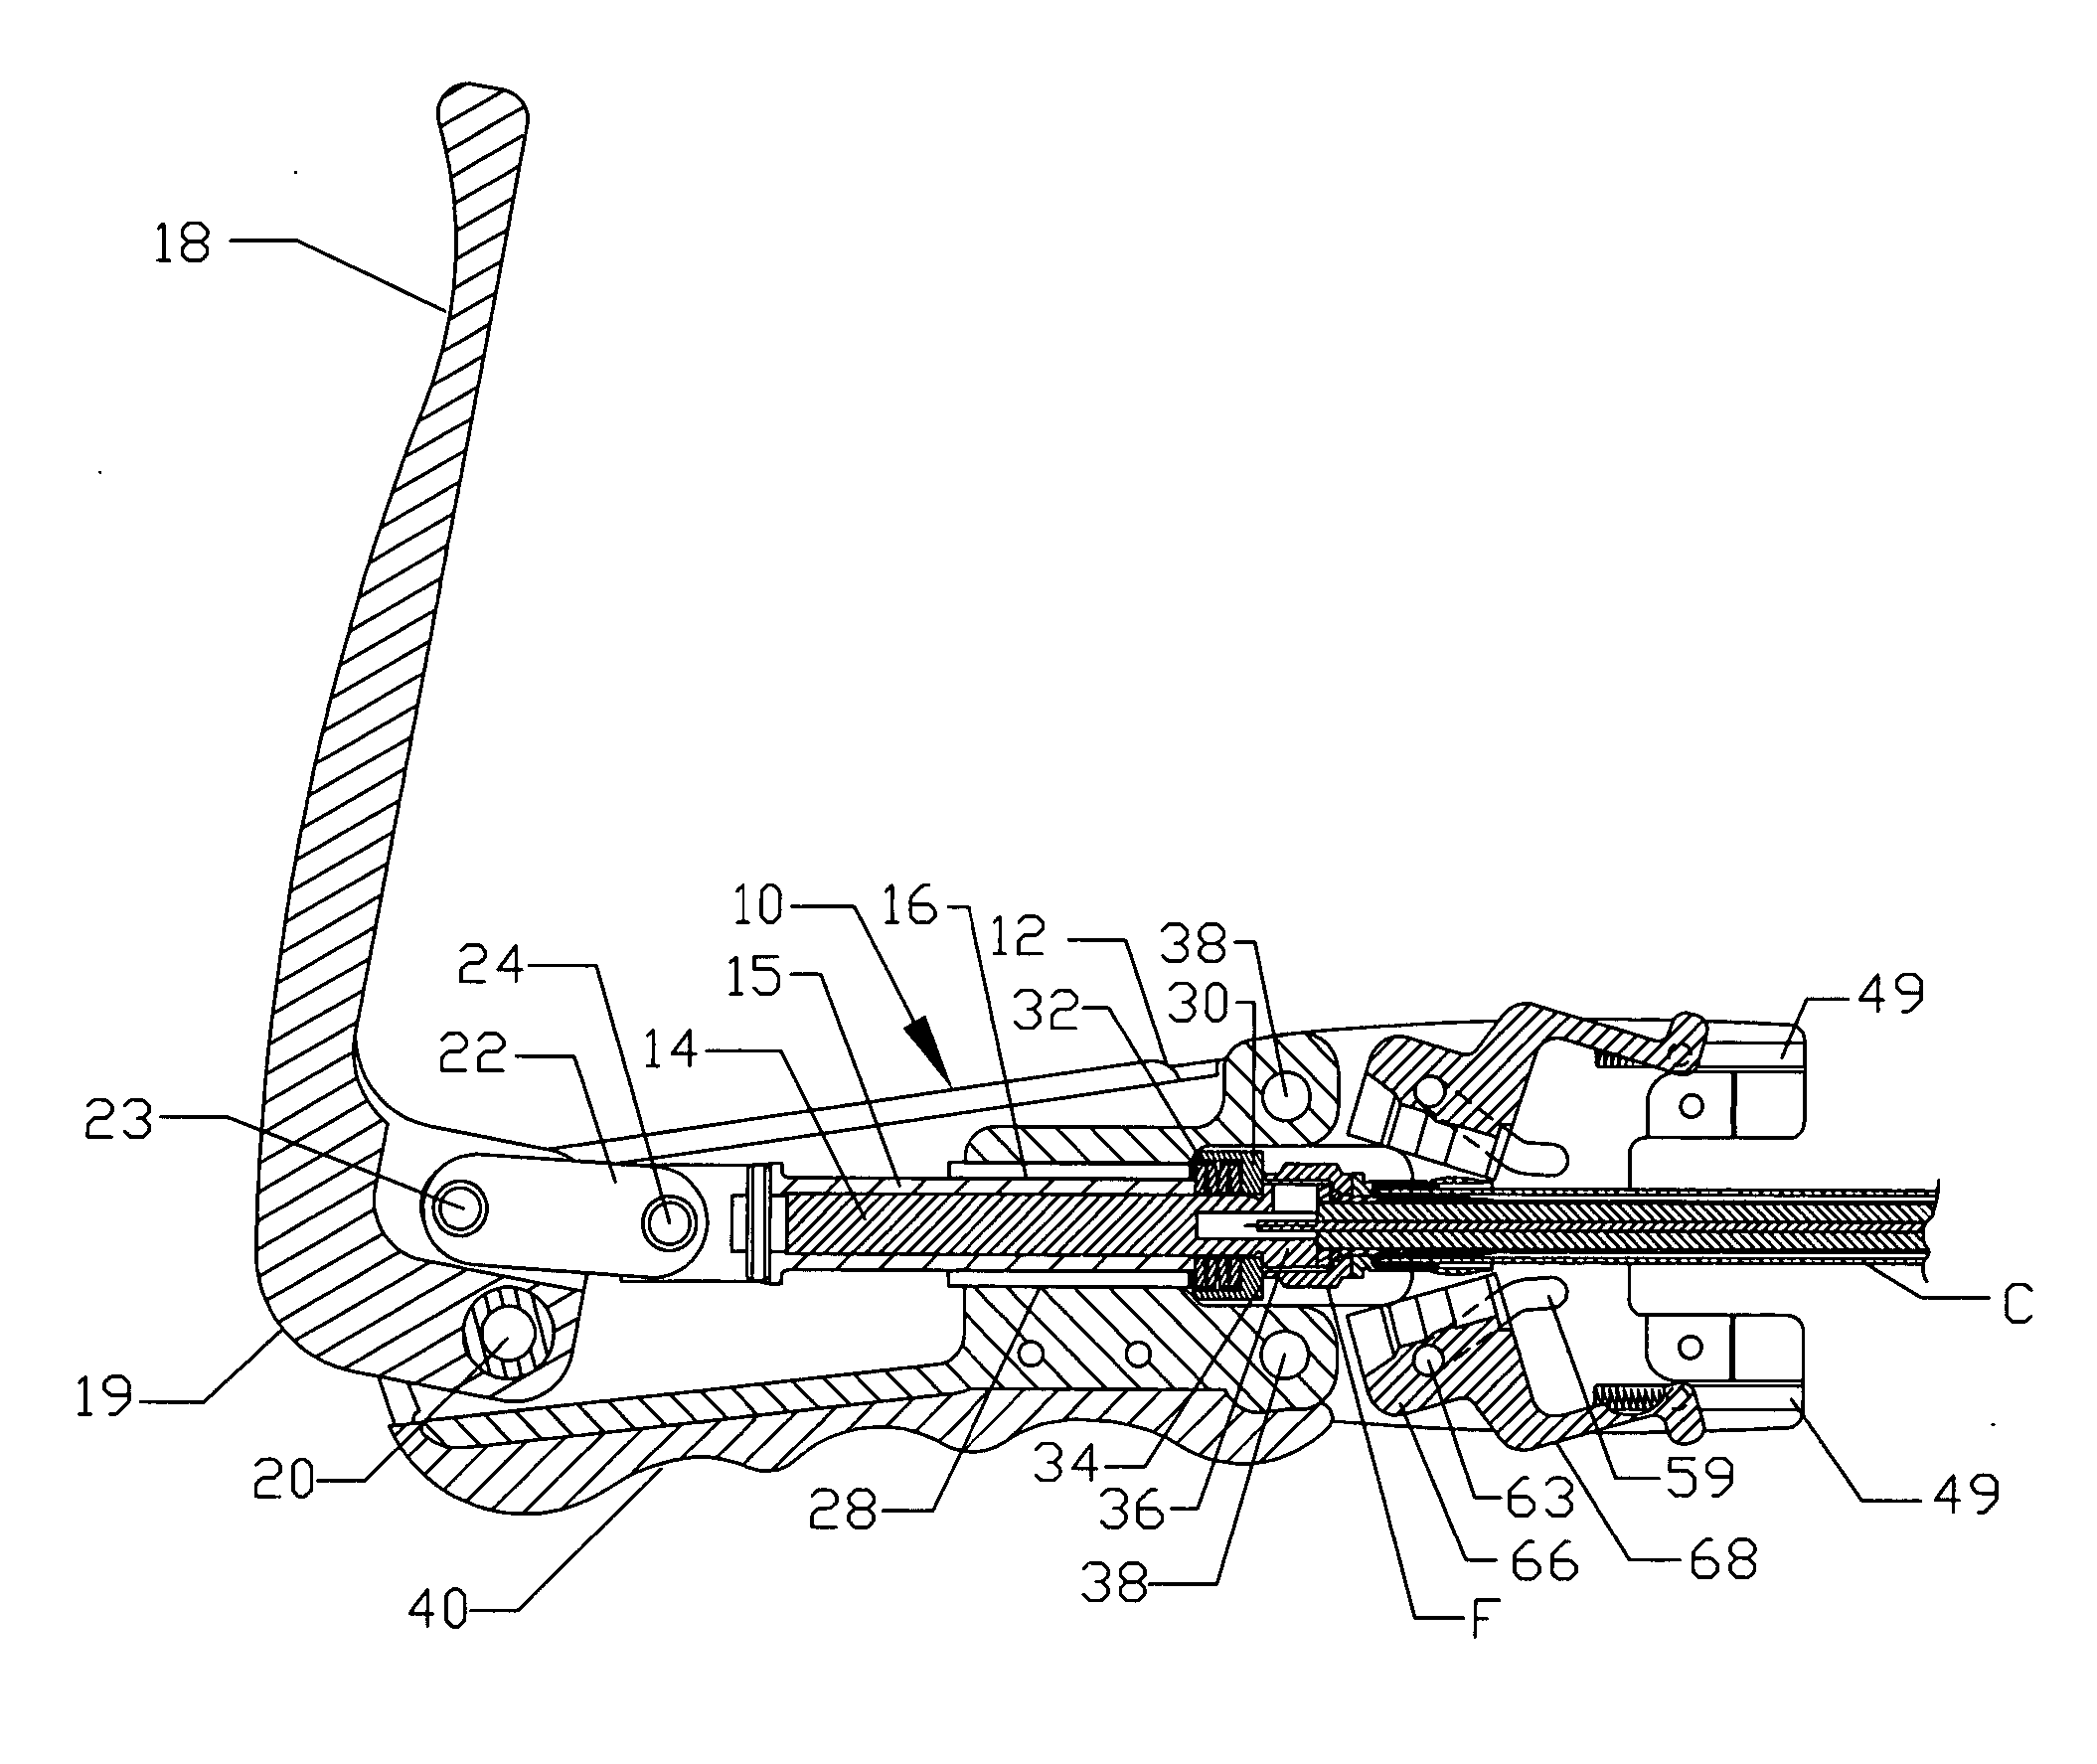 Coaxial cable fitting and crimping tool